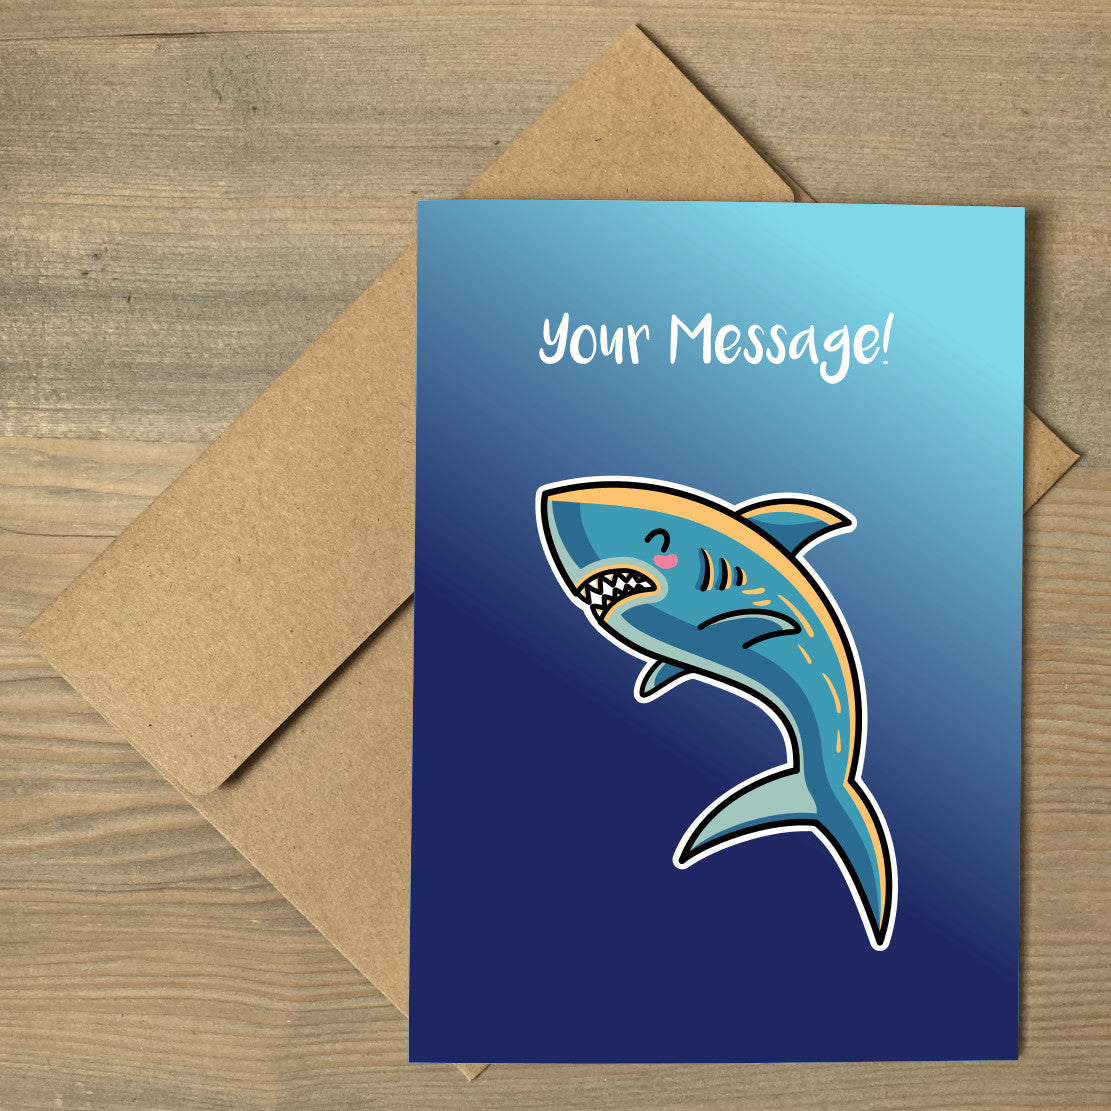 A blue greeting card lying flat on a brown envelope, with a design of a kawaii cute shark with personalised wording above